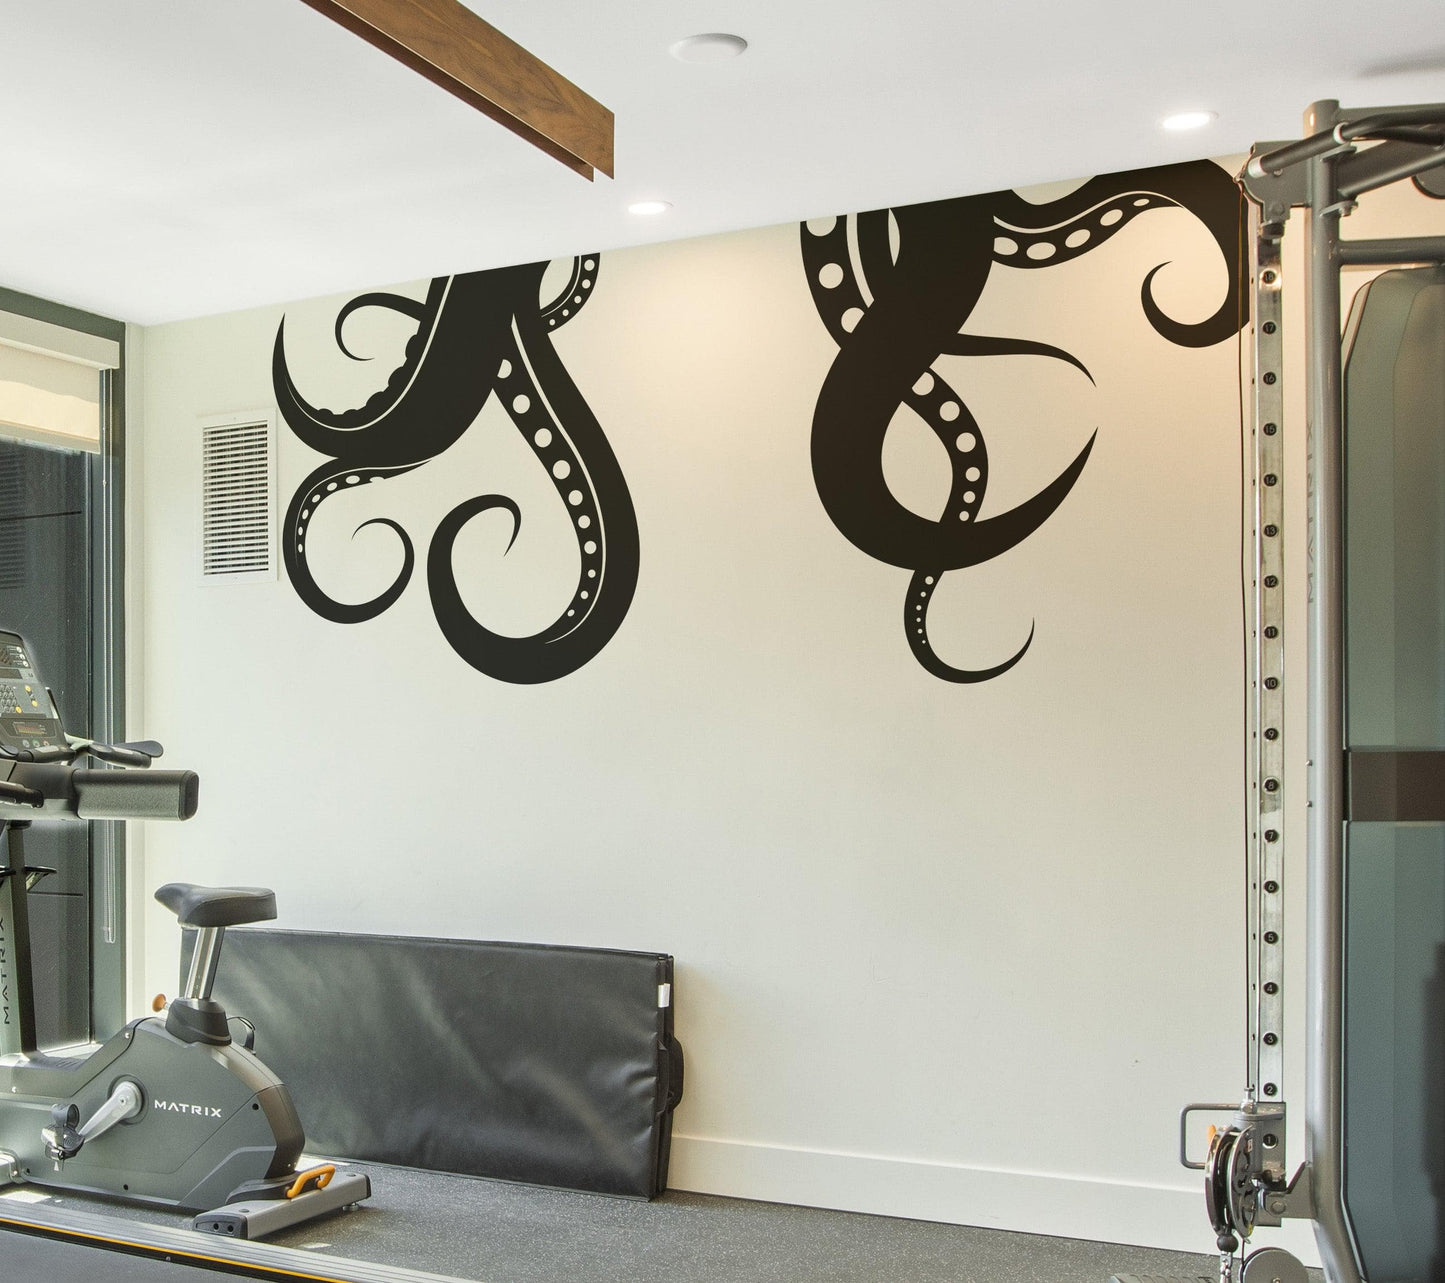 A black octopus tentacles decal on a white wall in a gym door.